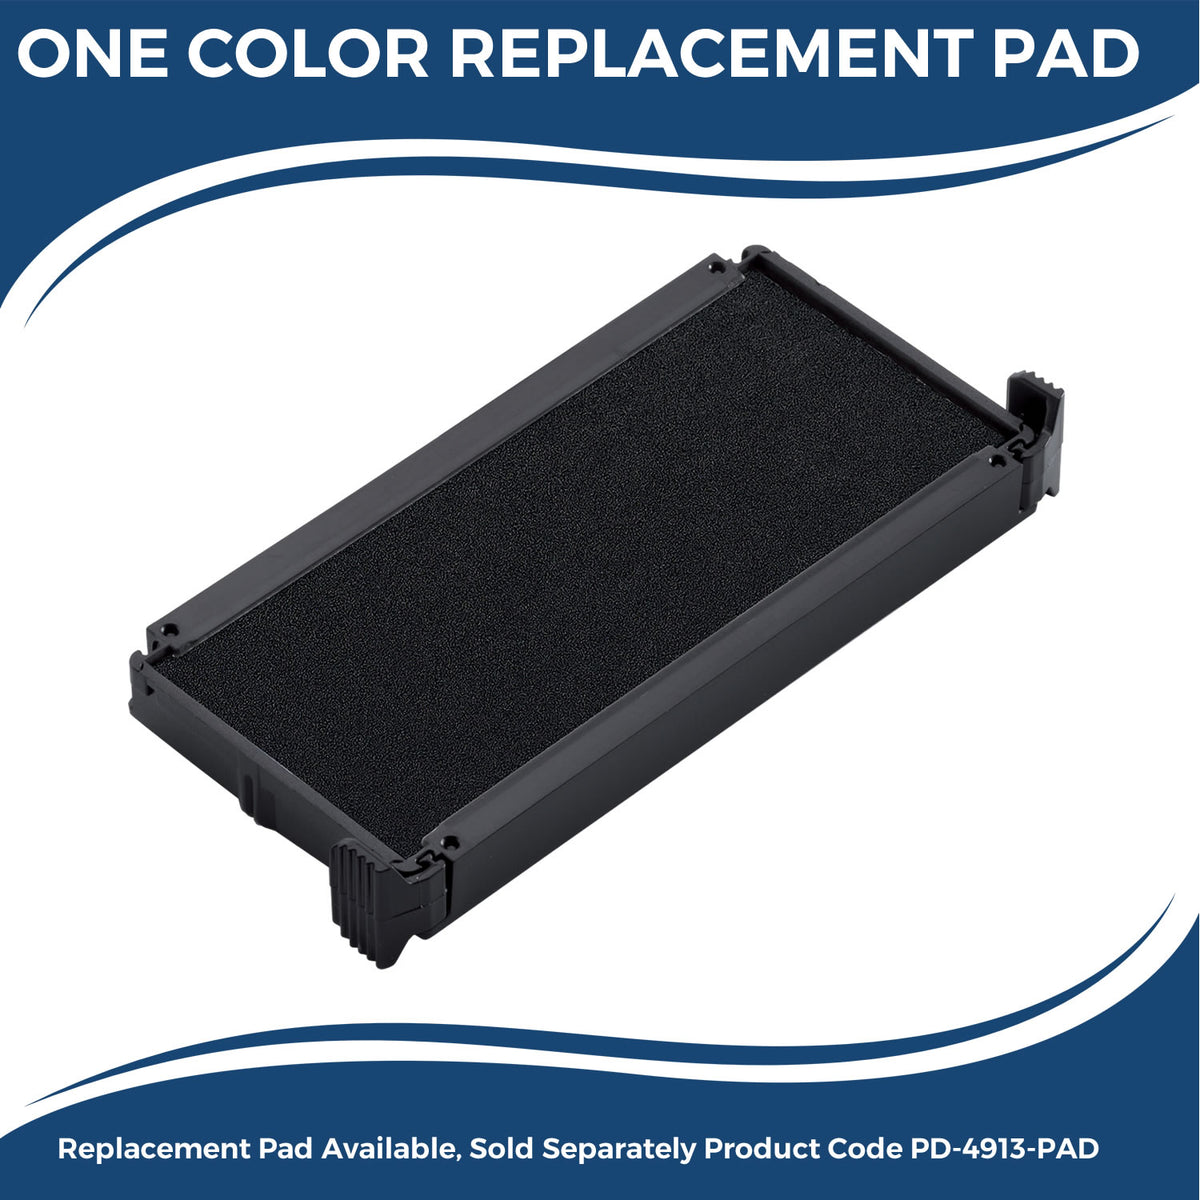 Large Self-Inking Special Stamp 5572S Large Replacment Pad